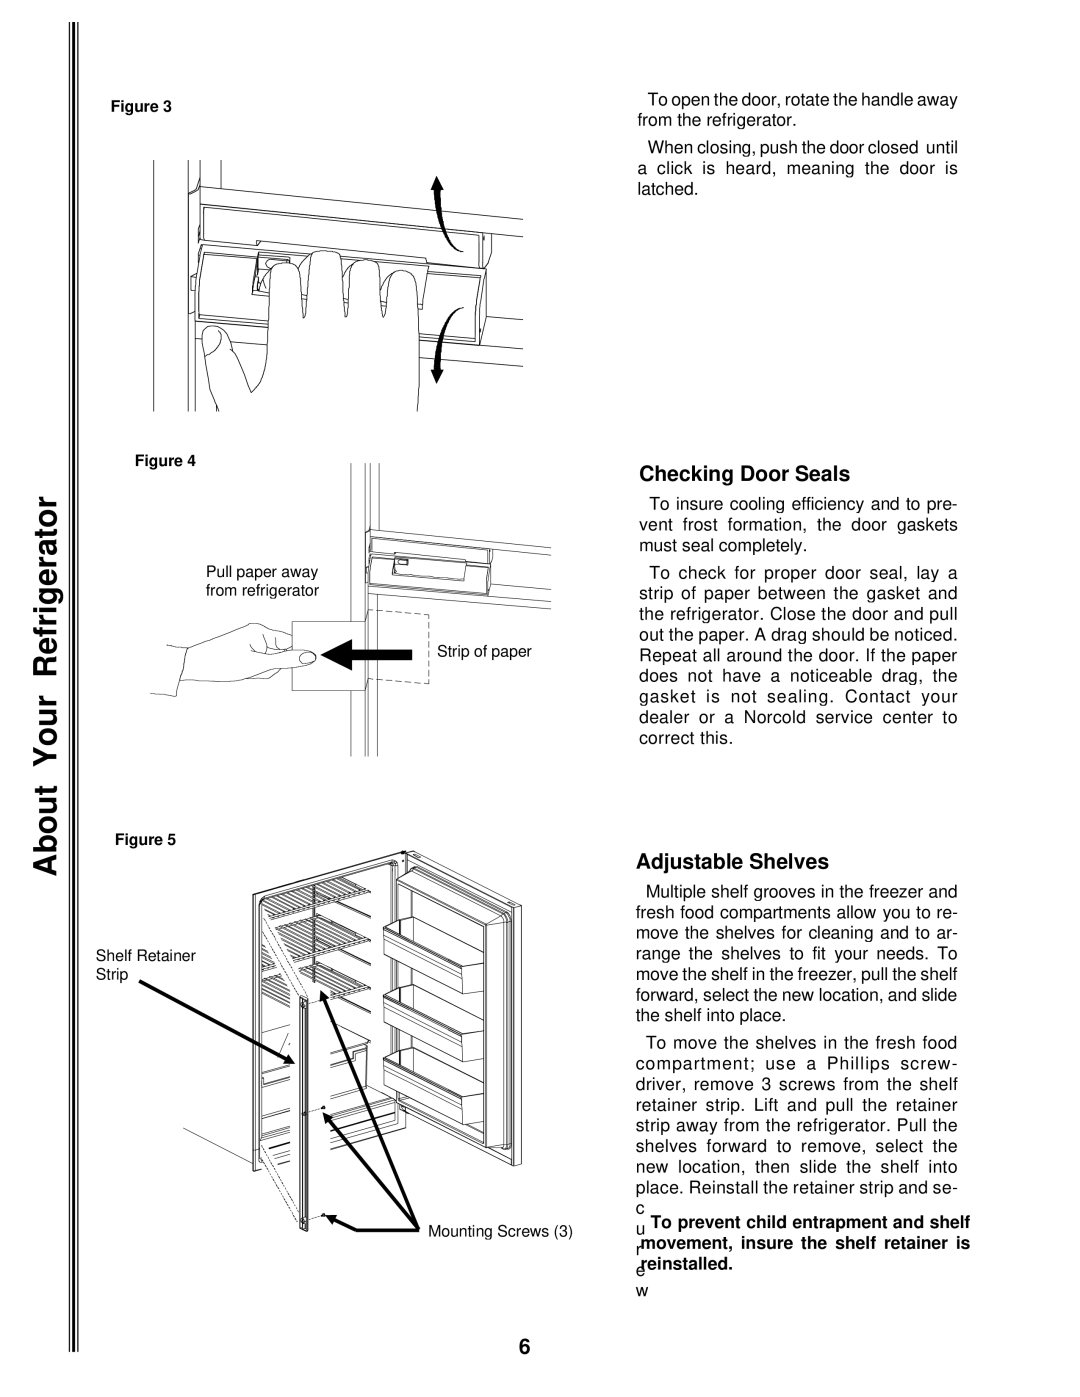 Norcold 9182, 9162, 9163, 9183 manual About Your Refrigerator, Checking Door Seals, Adjustable Shelves 